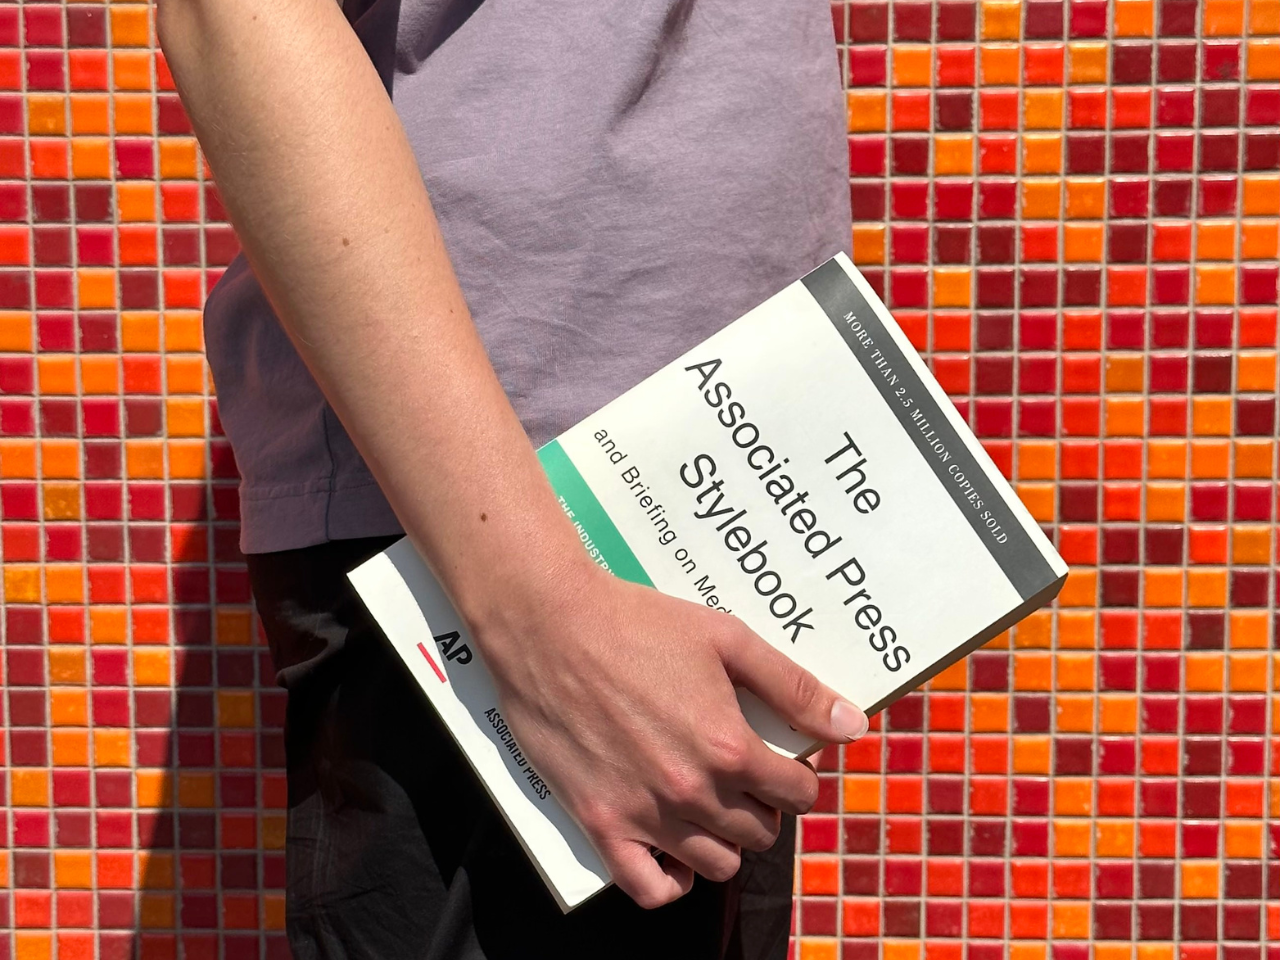 Content strategist Leen holds a printed copy of the AP Stylebook at their side in front of Emspace + Lovgren’s office building, which features a mid-century red, orange and yellow tiled wall.